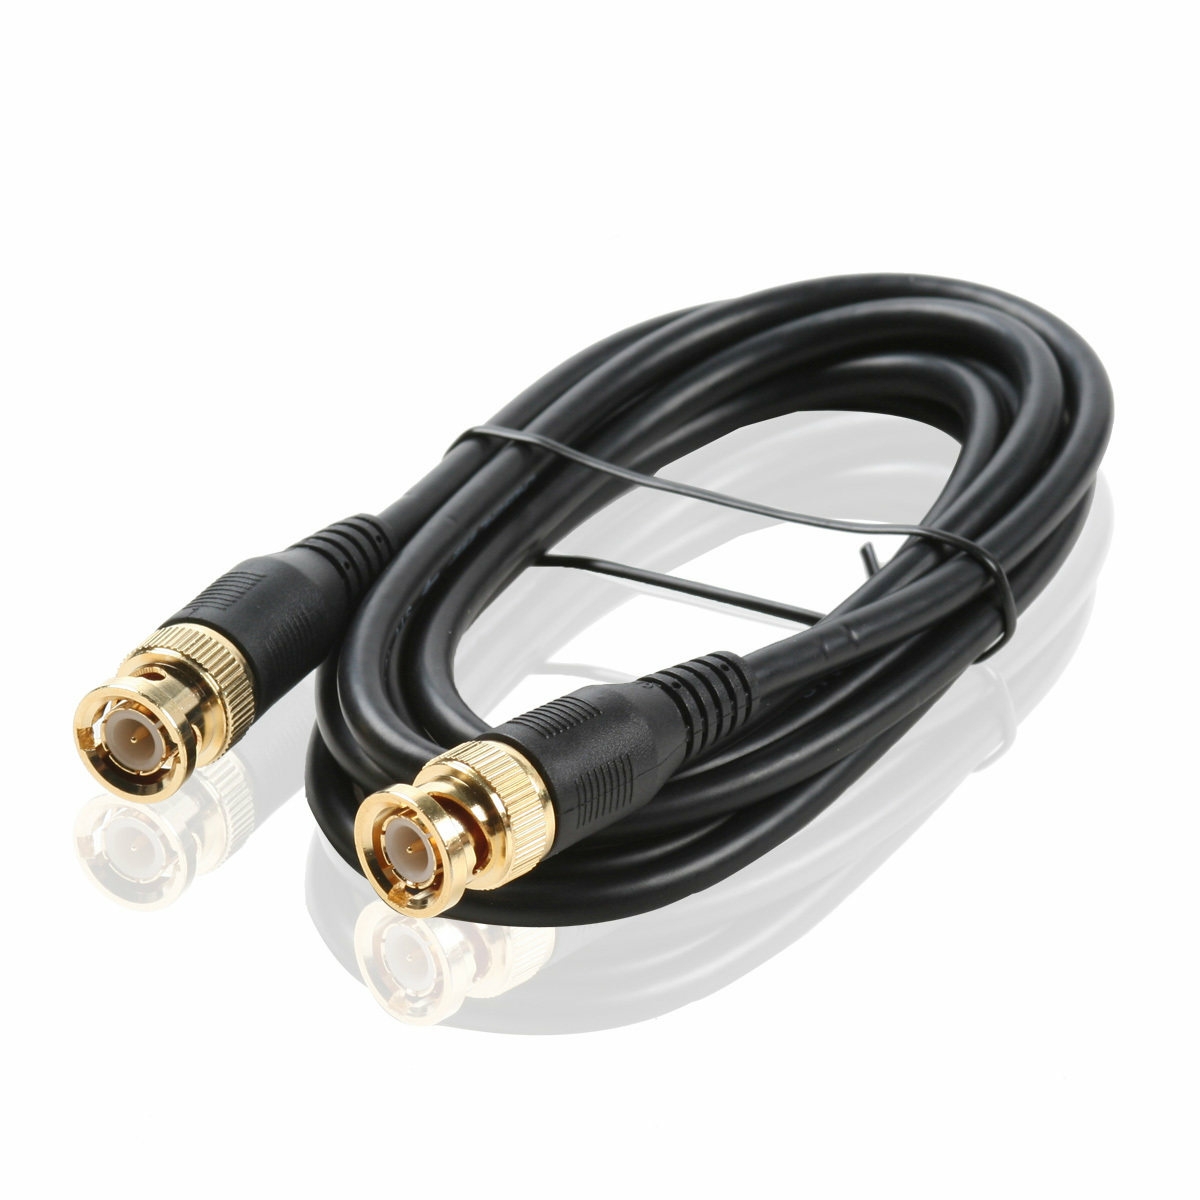 12G-SDI BNC cable with golden for Camera